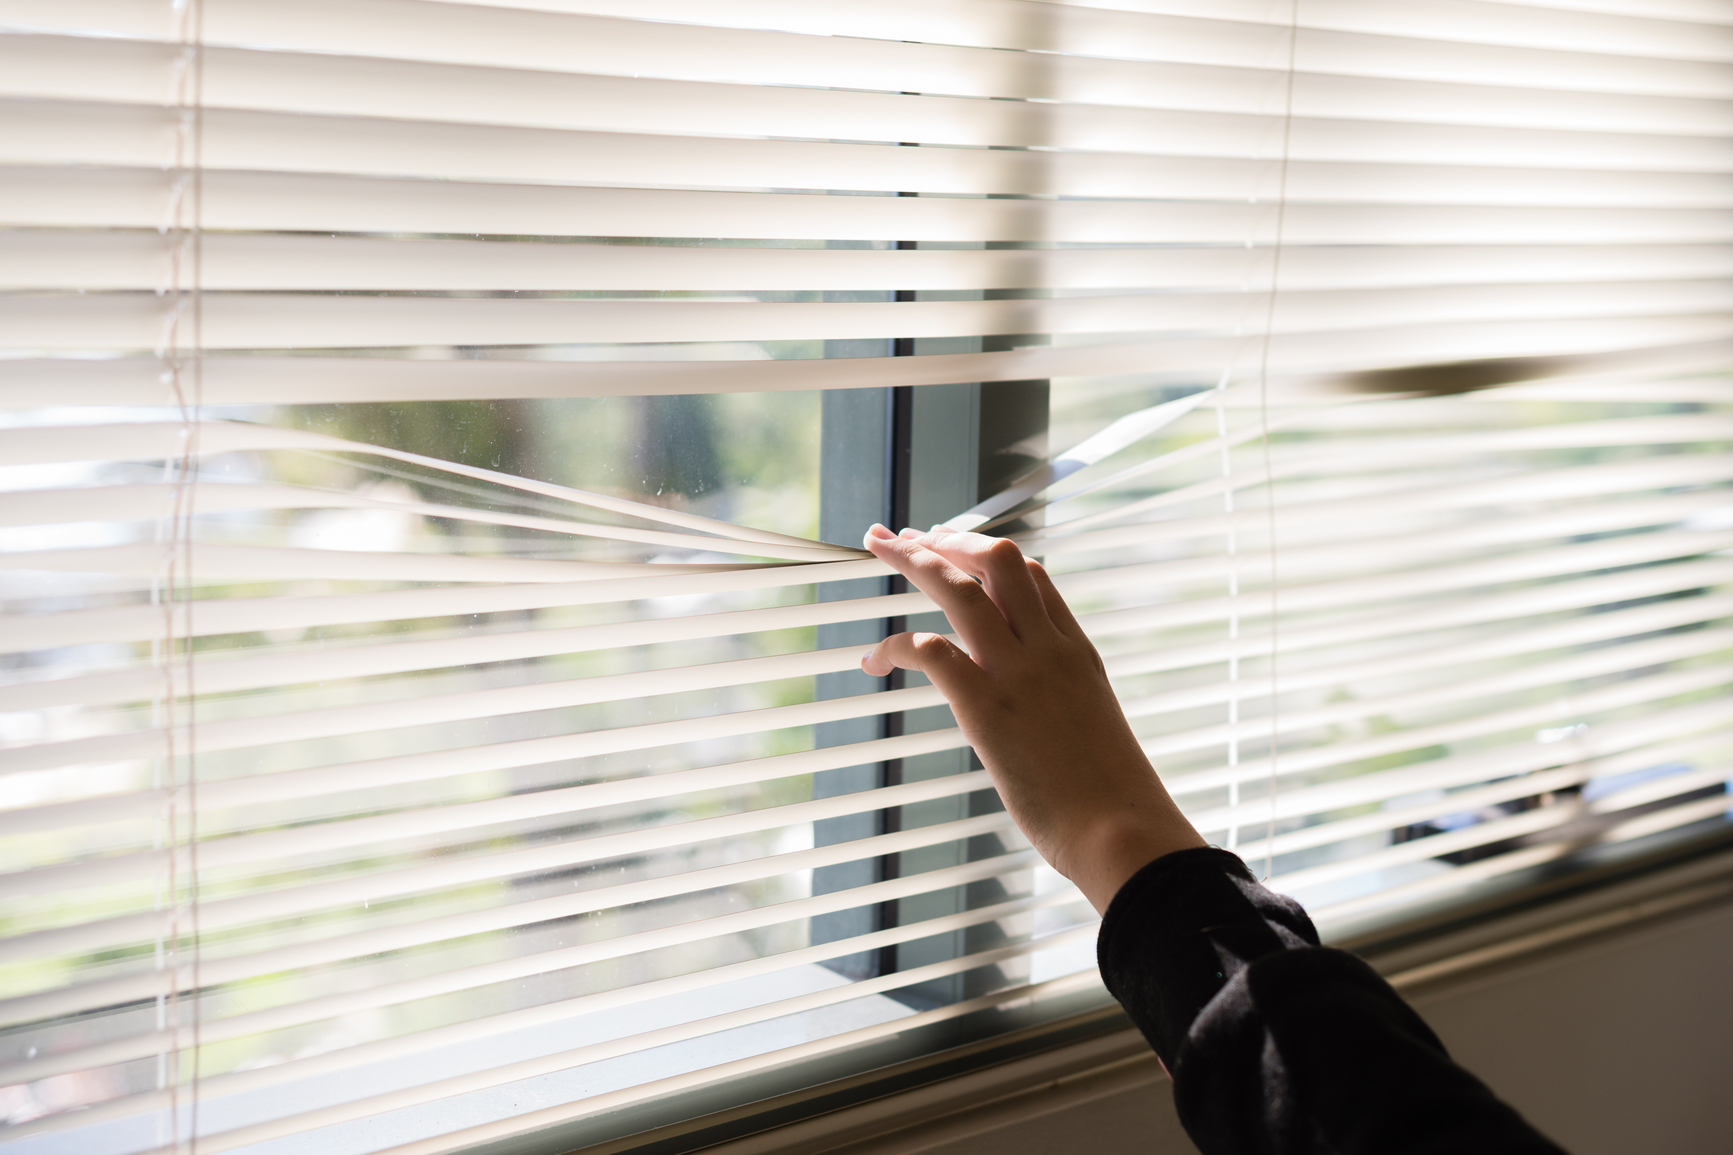 Image of someone looking through window blinds